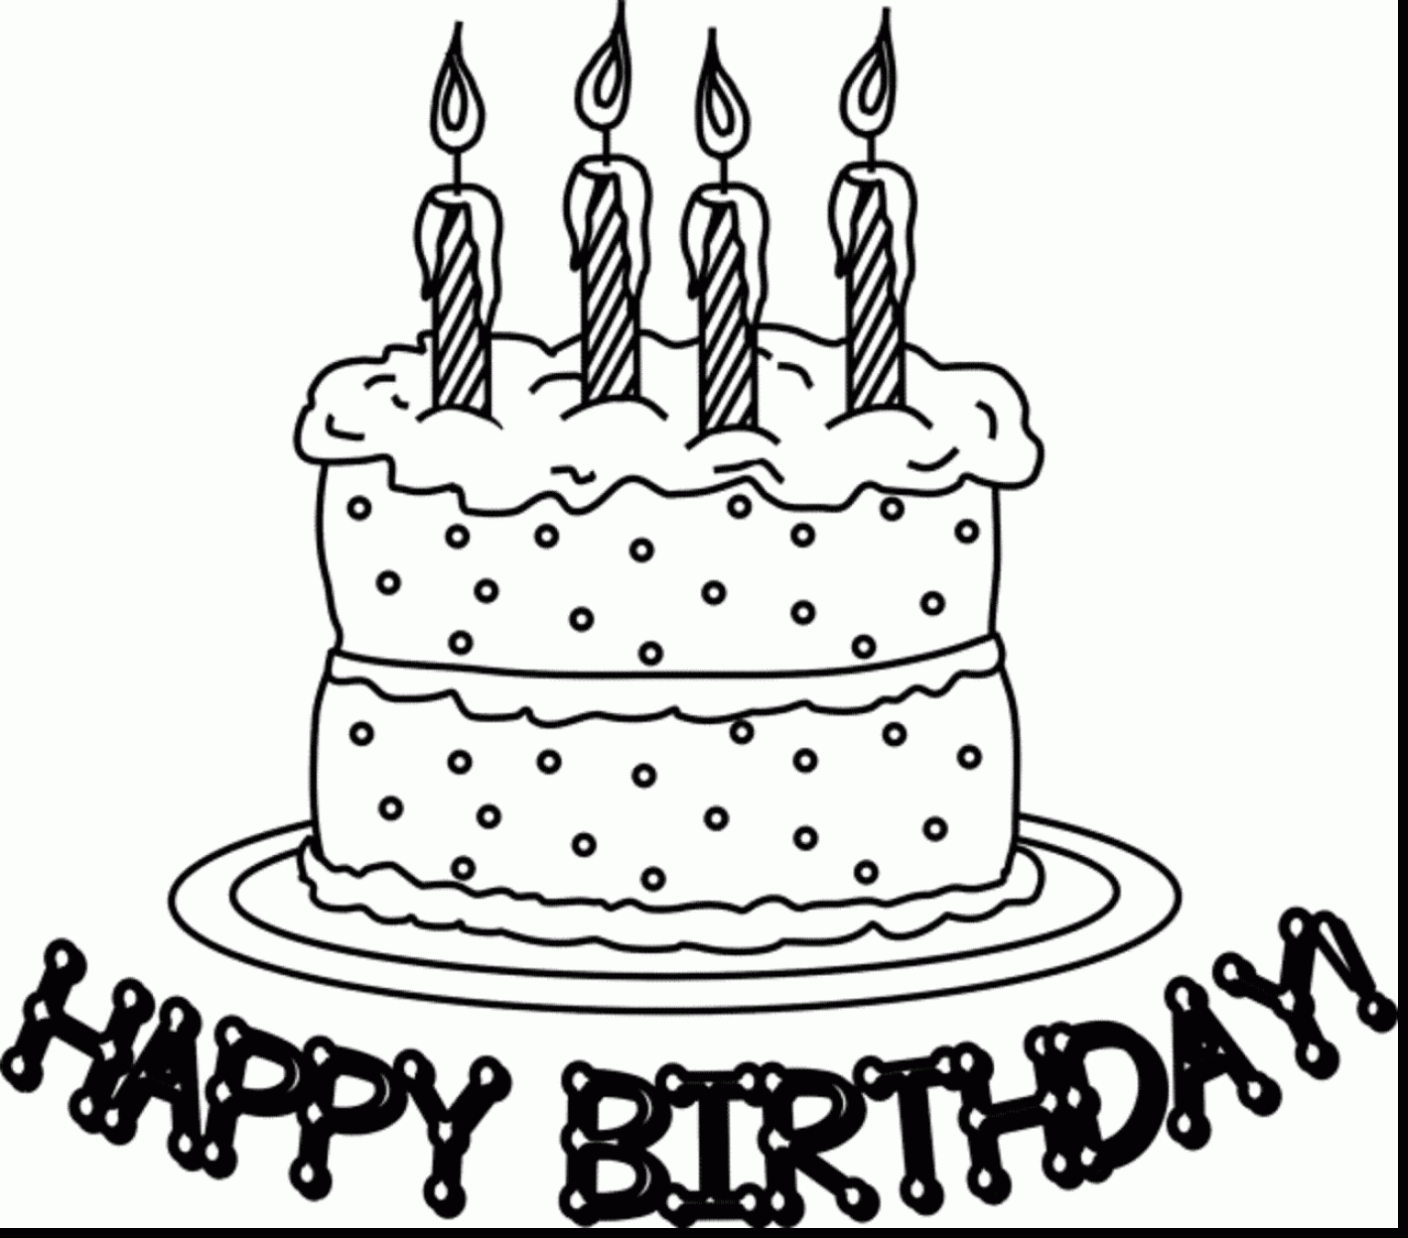 Free Clip art of Birthday Cake Clipart Black and White